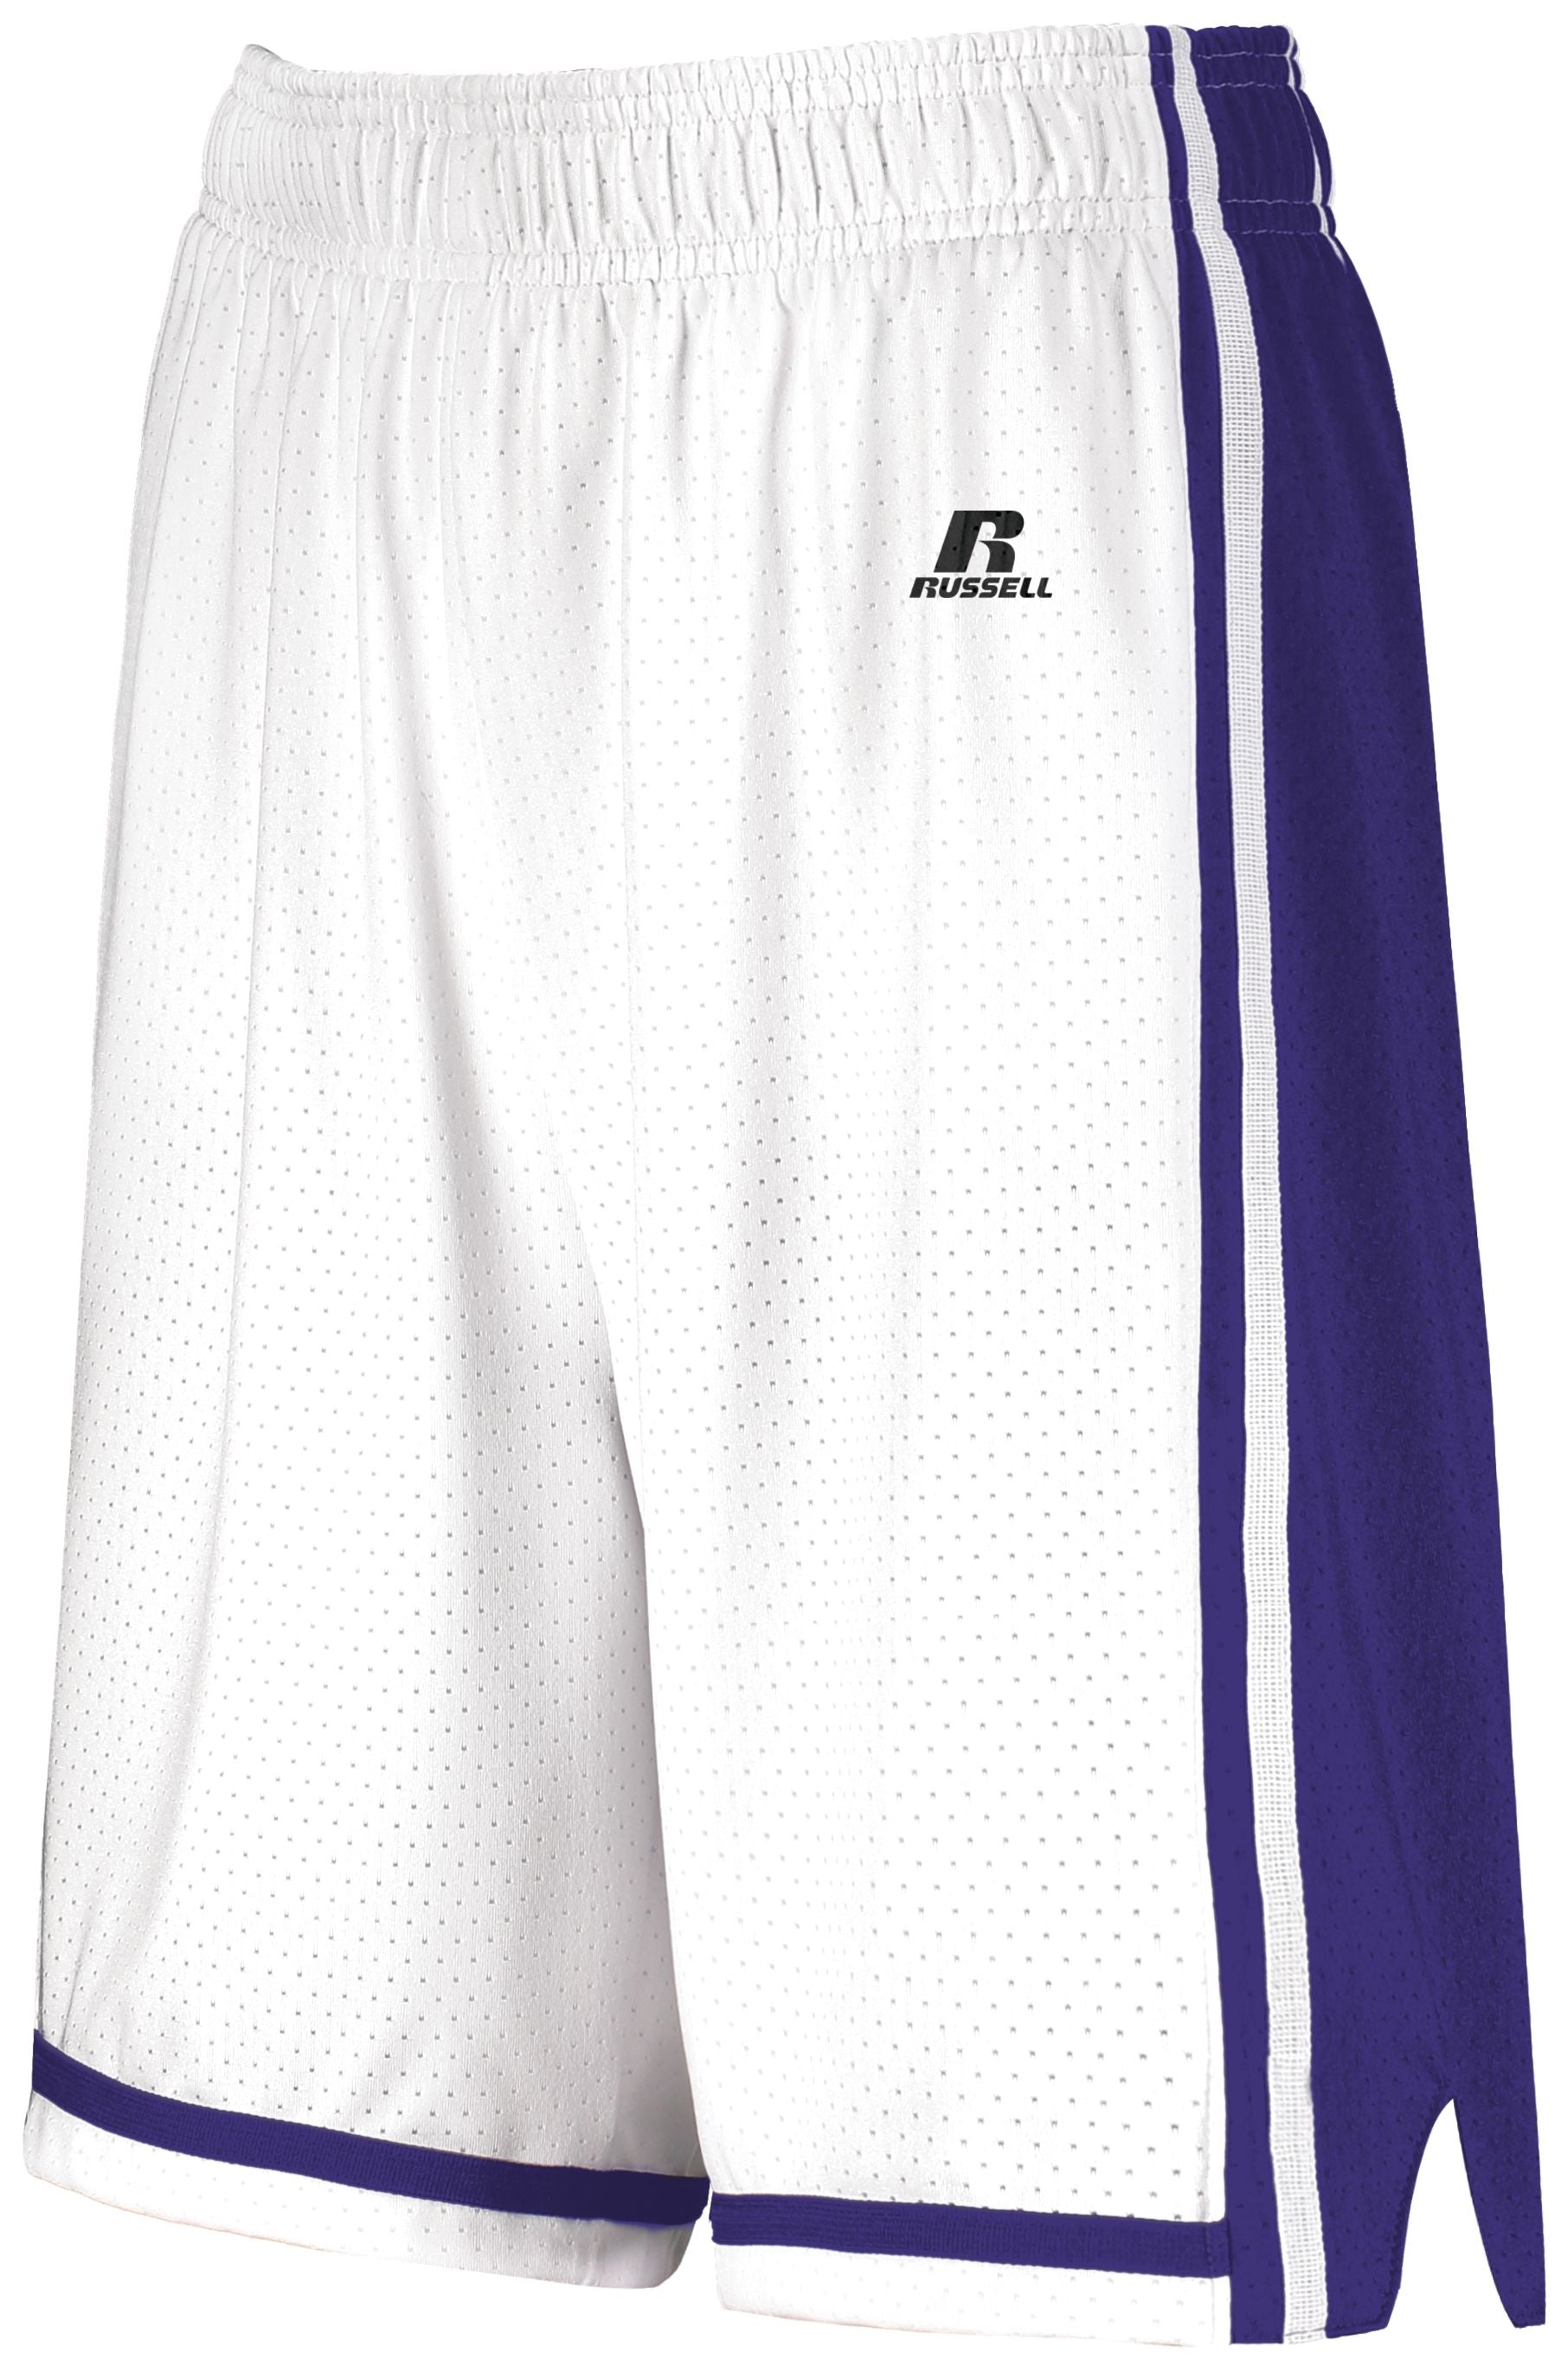 Russell Athletic Ladies Legacy Basketball Shorts in White/Purple  -Part of the Ladies, Ladies-Shorts, Basketball, Russell-Athletic-Products, All-Sports, All-Sports-1 product lines at KanaleyCreations.com